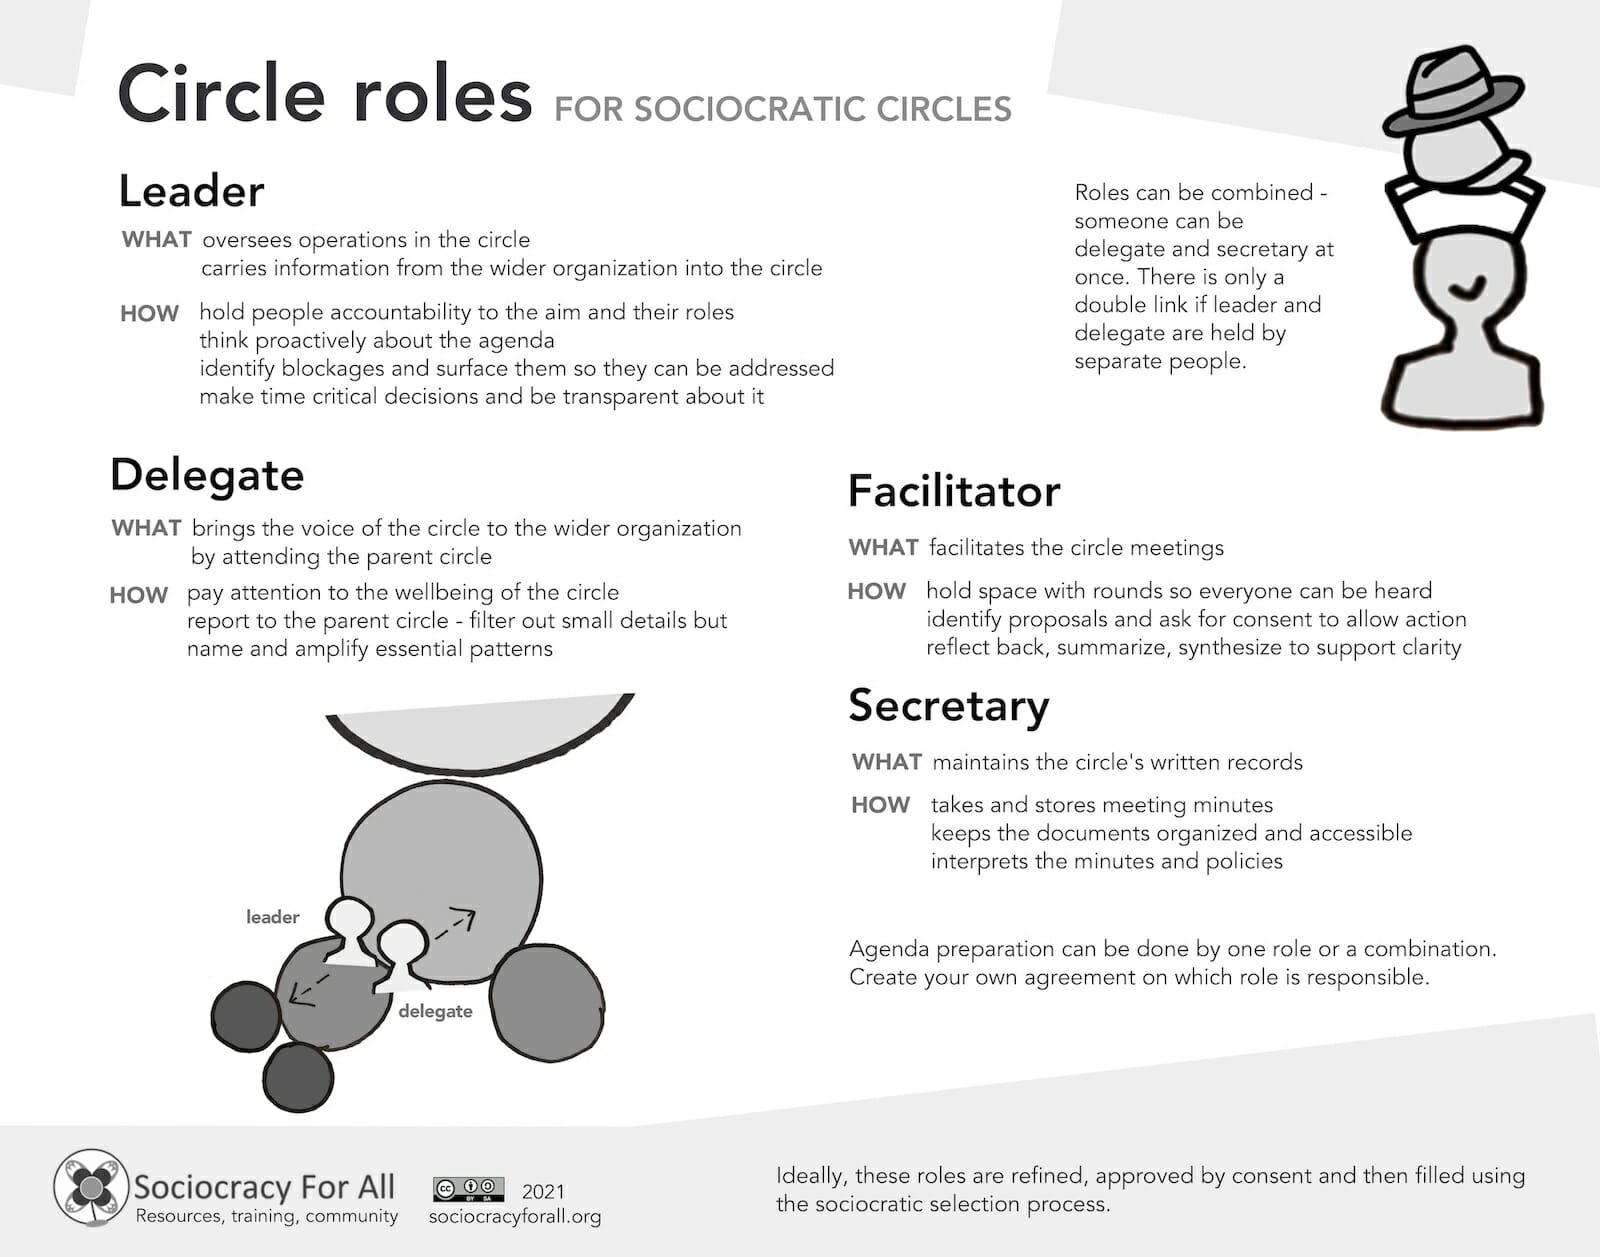 Image of downloadable poster containing circle roles in sociocracy: Leader, delegate, facilitator, and secretary.